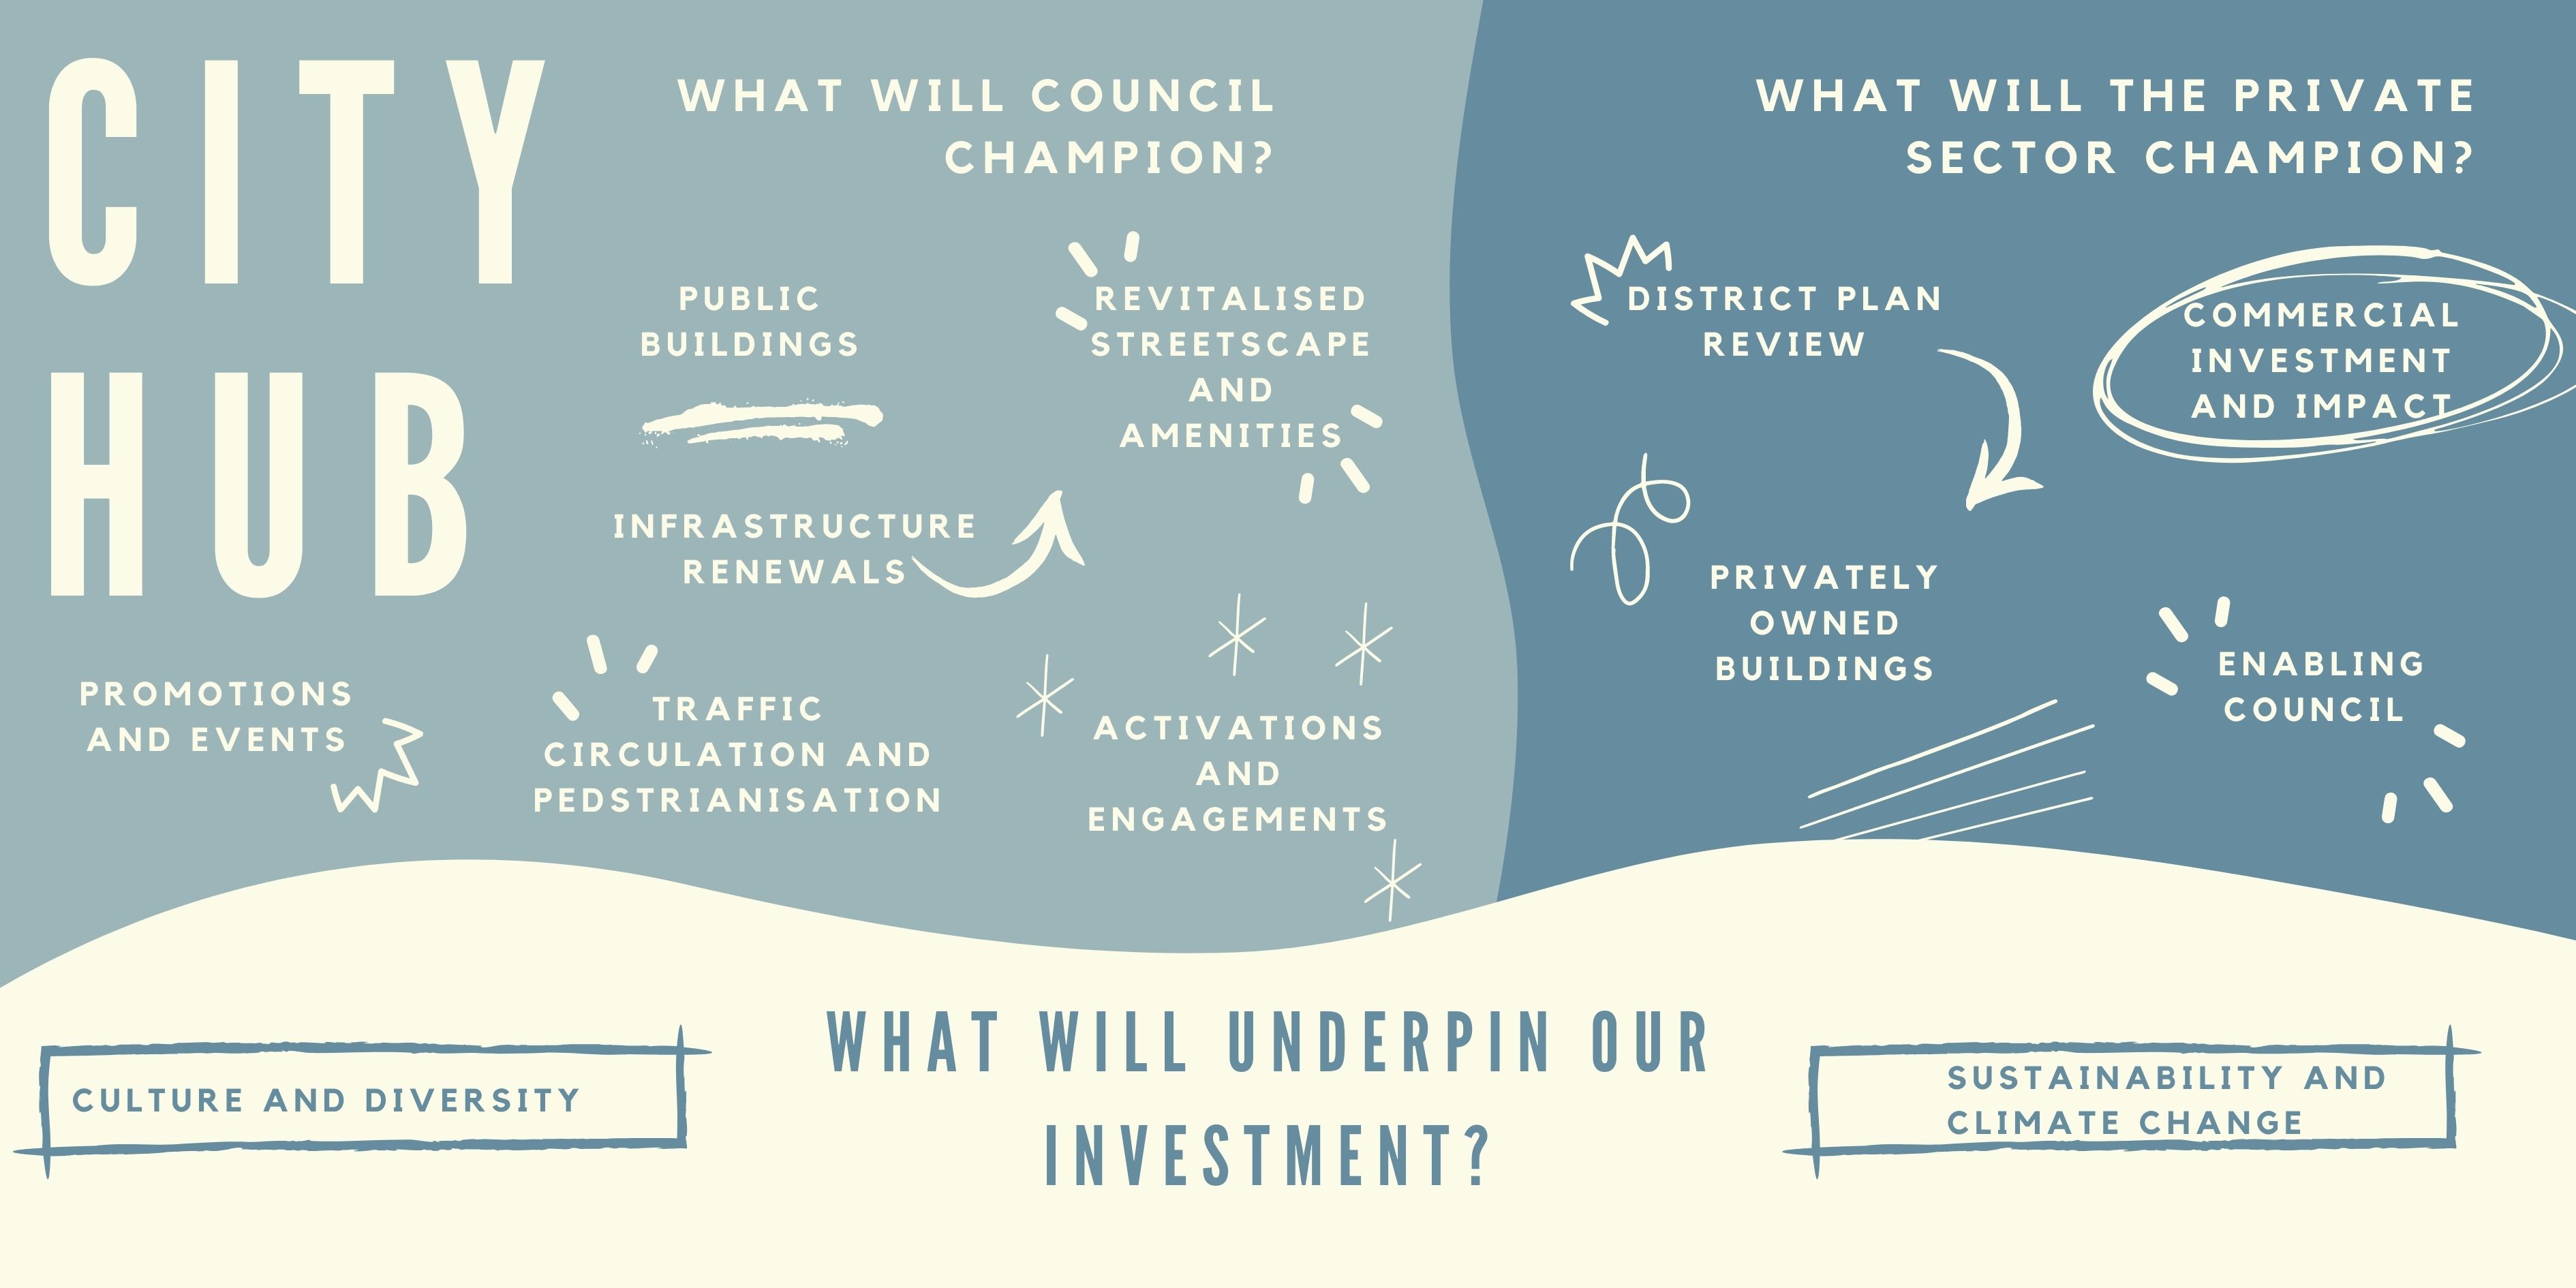 This graphic indicates the scope of the CityHub Strategy. It delineates between what council will champion and what the private sector will champion. on the left side it indicates that the Council will champion revatilise street scape and amentities, public buildings, activations and engagements, promotions and events, traffic circulation and pedtrianisation and Imfrastructure renewals. The private sector (to the right of the graphic) will champion District Plan review, COmmercial investment and impact, privately owned buildings, commercial investment and impact, Enabling Council. At the bottom of the graphic a box indicates what will underpin the investment for both council and the private sector. Those things are Culture and Diversity and Sustainability and Climate Change